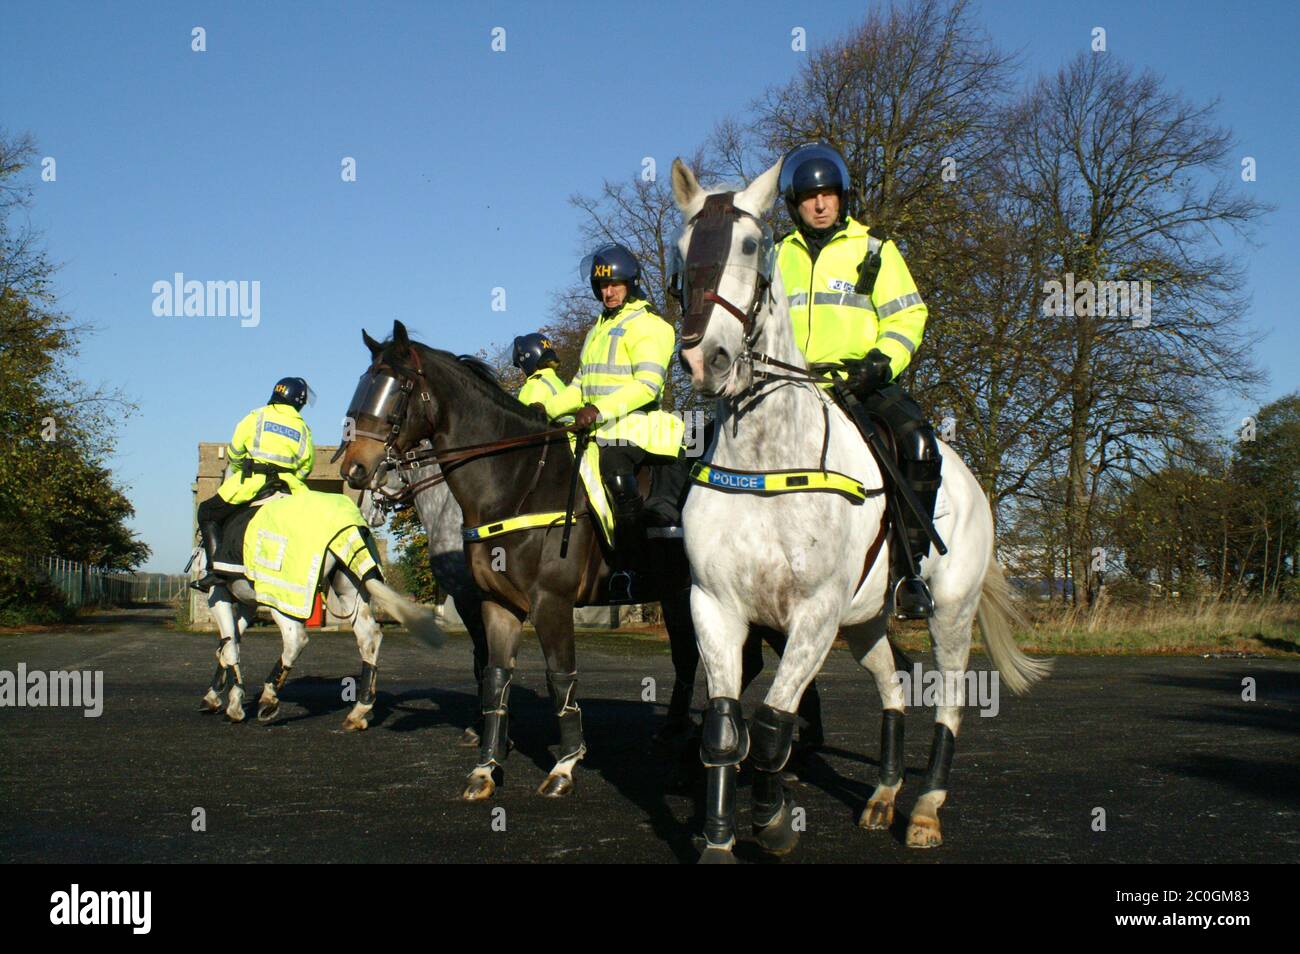 Civil disorder, Mounted police, Stock Photo